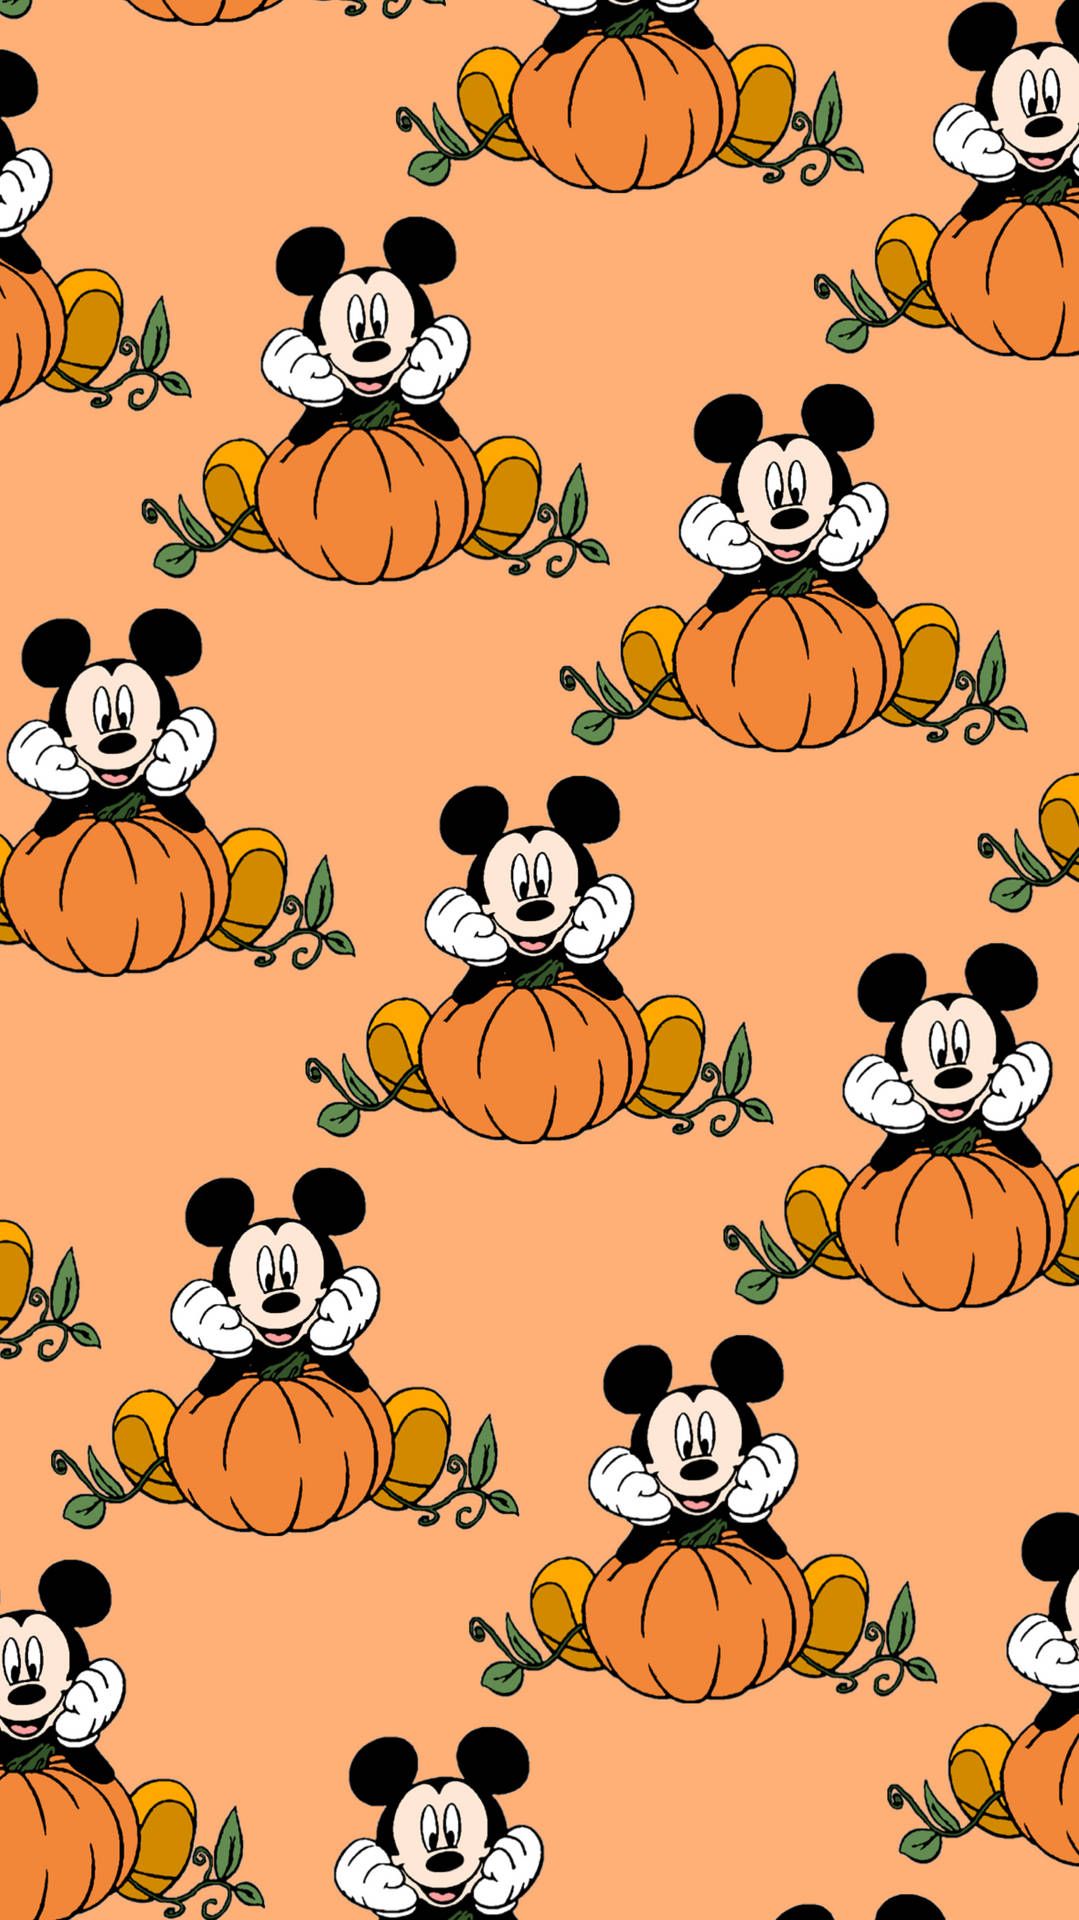 Mickey Mouse Halloween iPhone Wallpaper with high-resolution 1080x1920 pixel. You can use this wallpaper for your iPhone 5, 6, 7, 8, X, XS, XR backgrounds, Mobile Screensaver, or iPad Lock Screen - Halloween